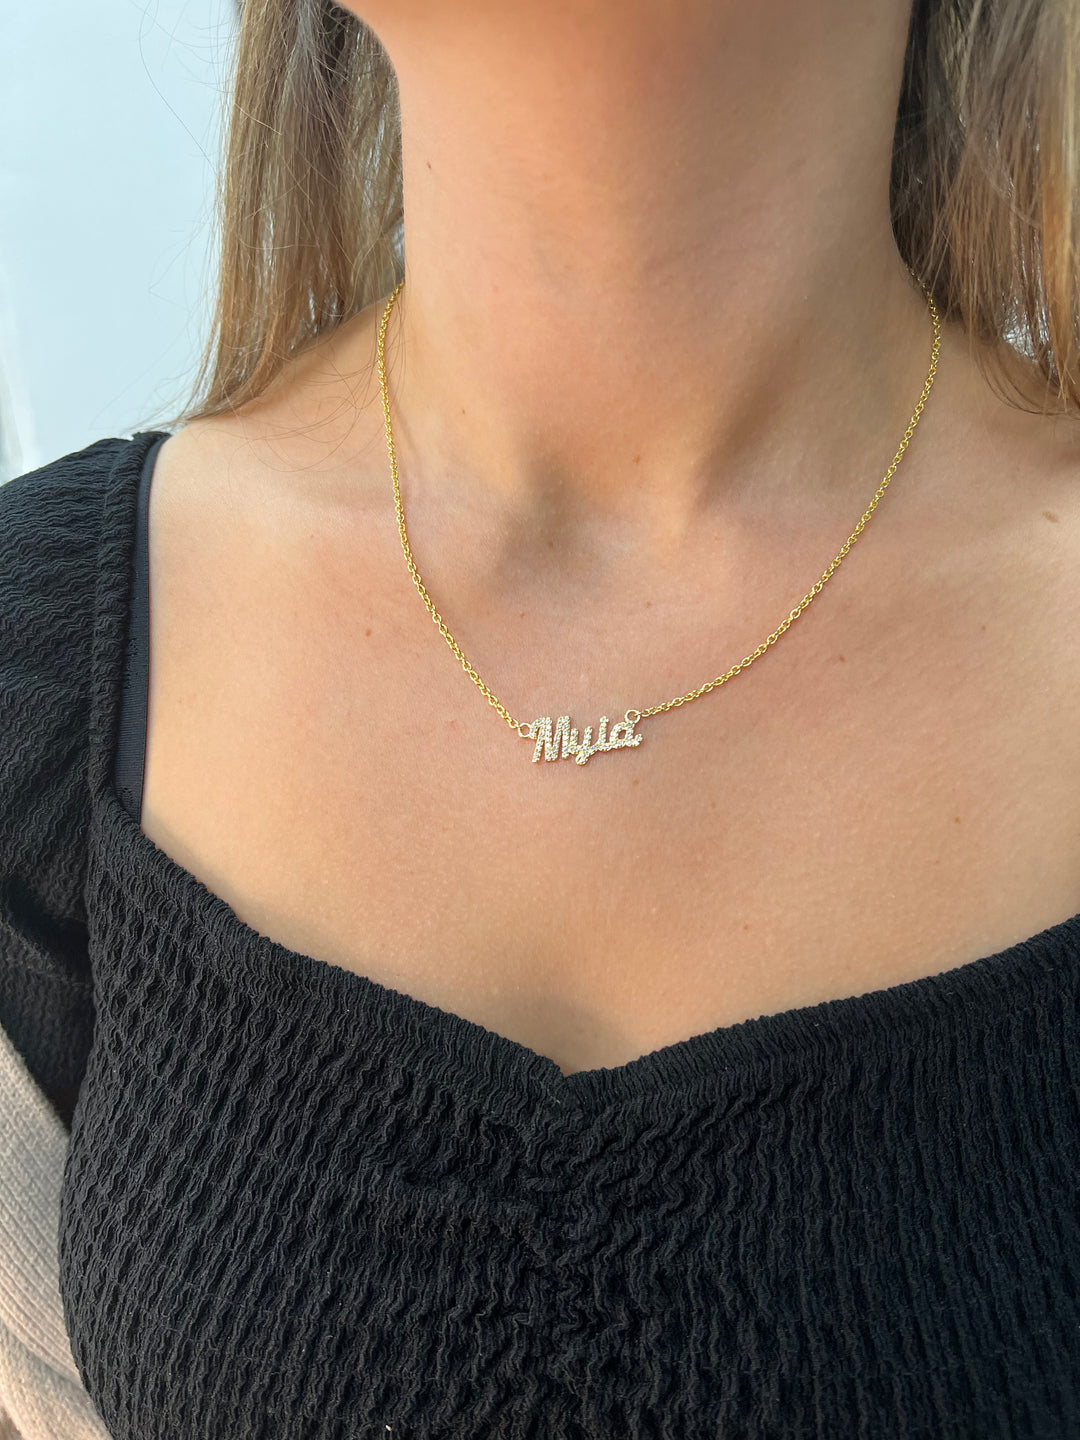 custom-diamond-name-pendant-necklace-in-yellow-gold-with-chain